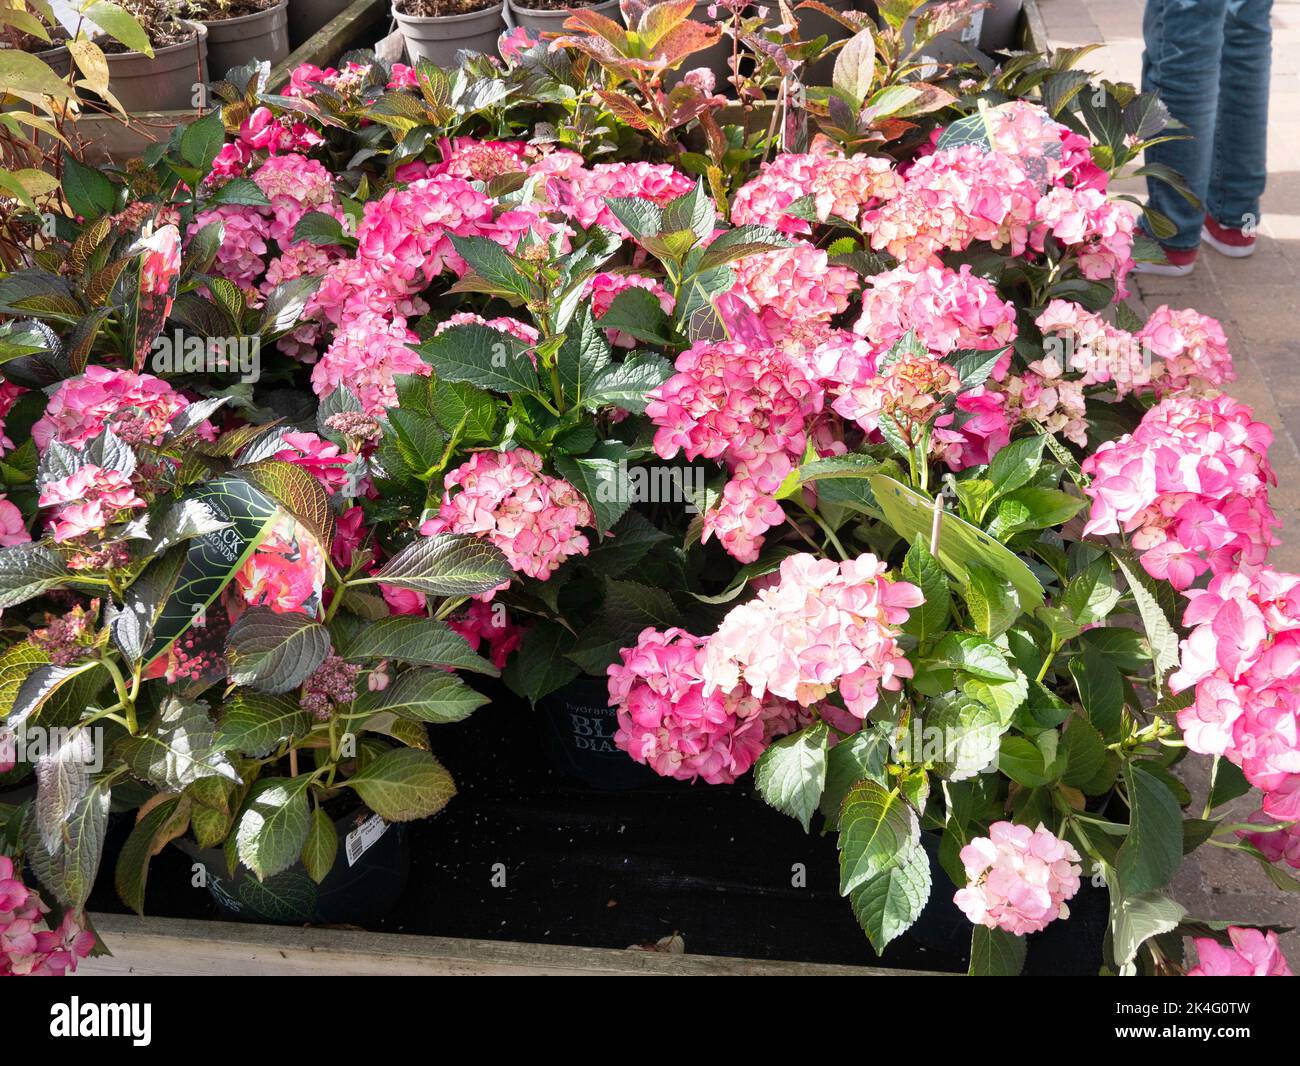 A display of potted Black Diamond  Hydrangea plants in a well stocked garden centre in summer Stock Photo